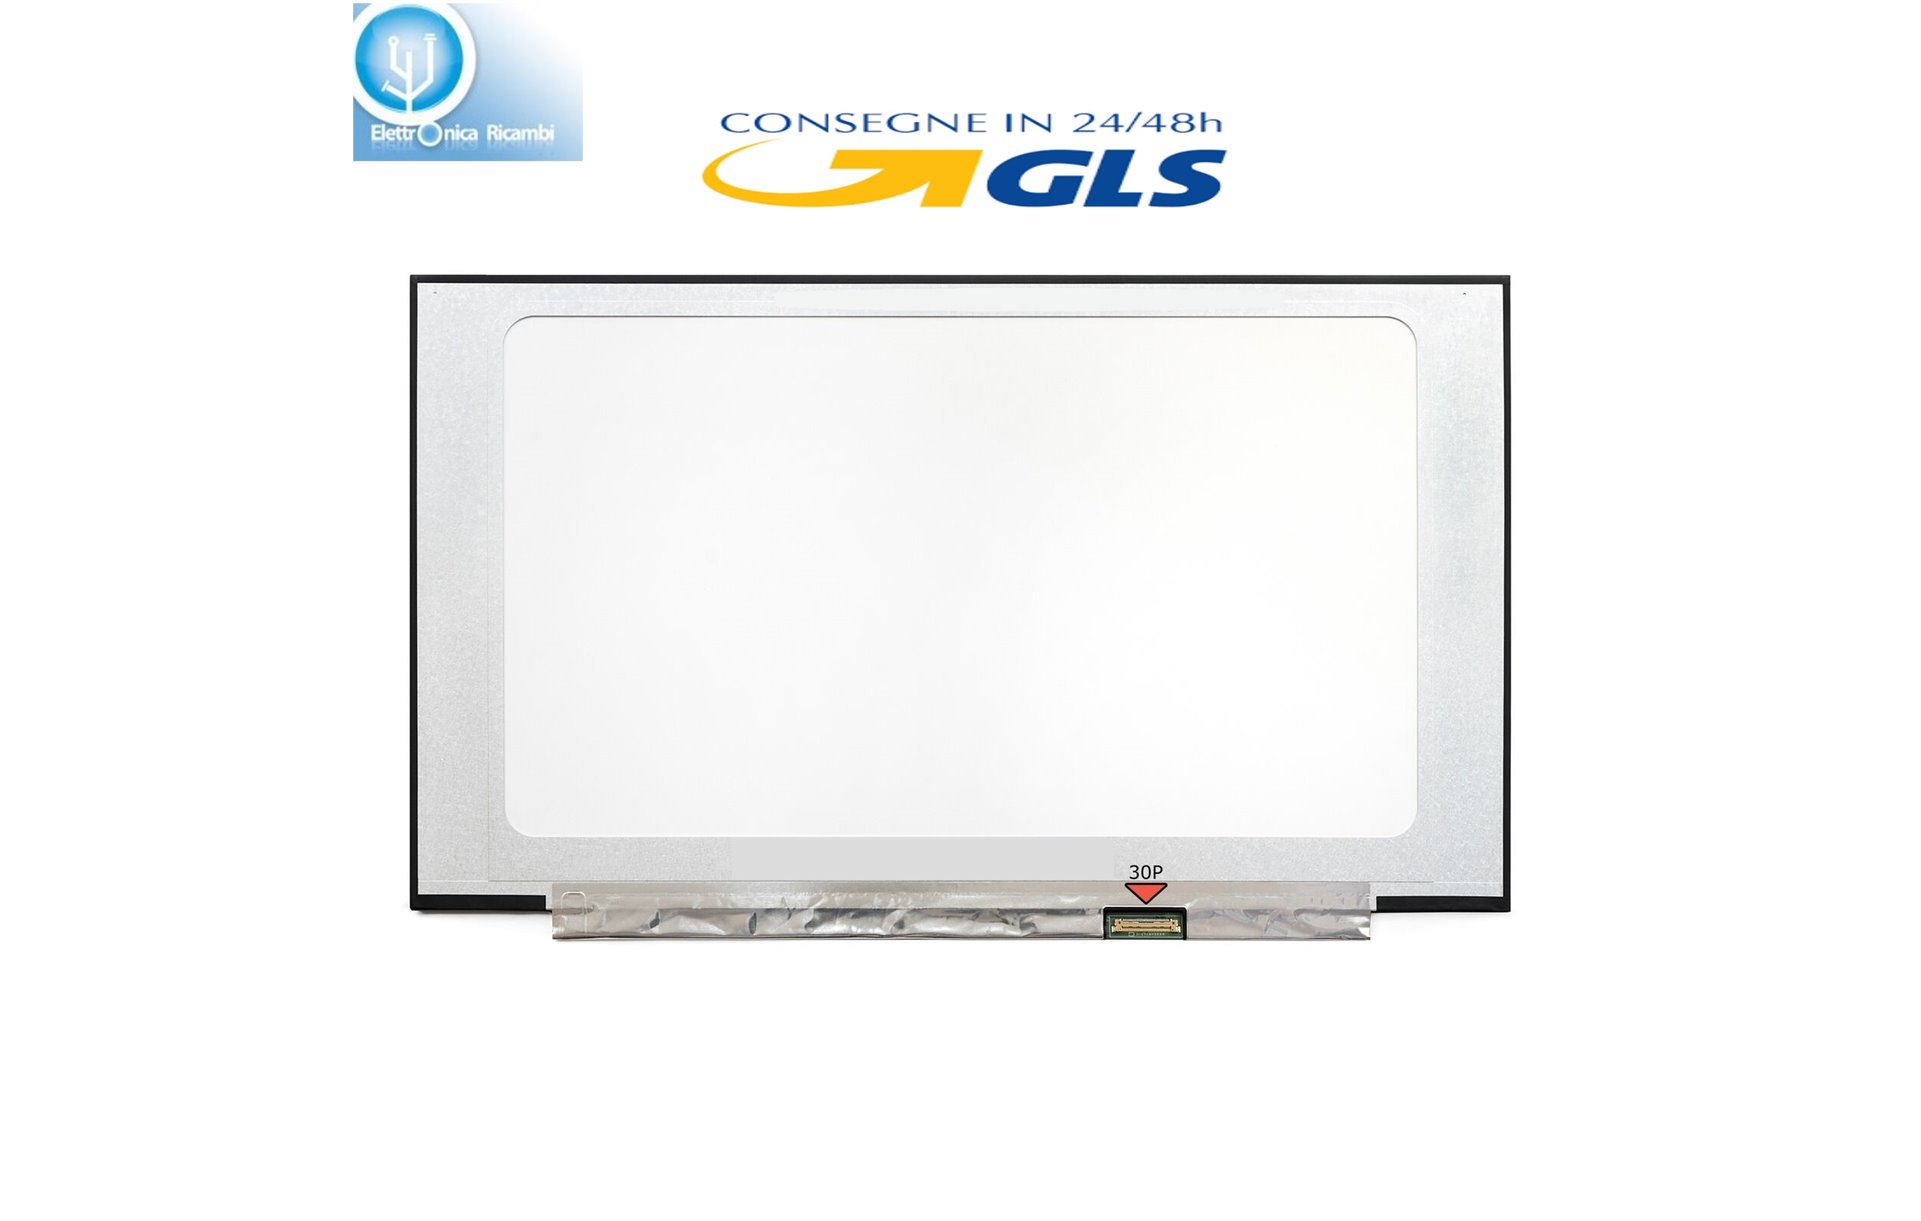 Display CyberPower TRACER IV 15 STUDIO 300 LCD 15,6 LED Slim 1920x1080 30-pin Fh IPS